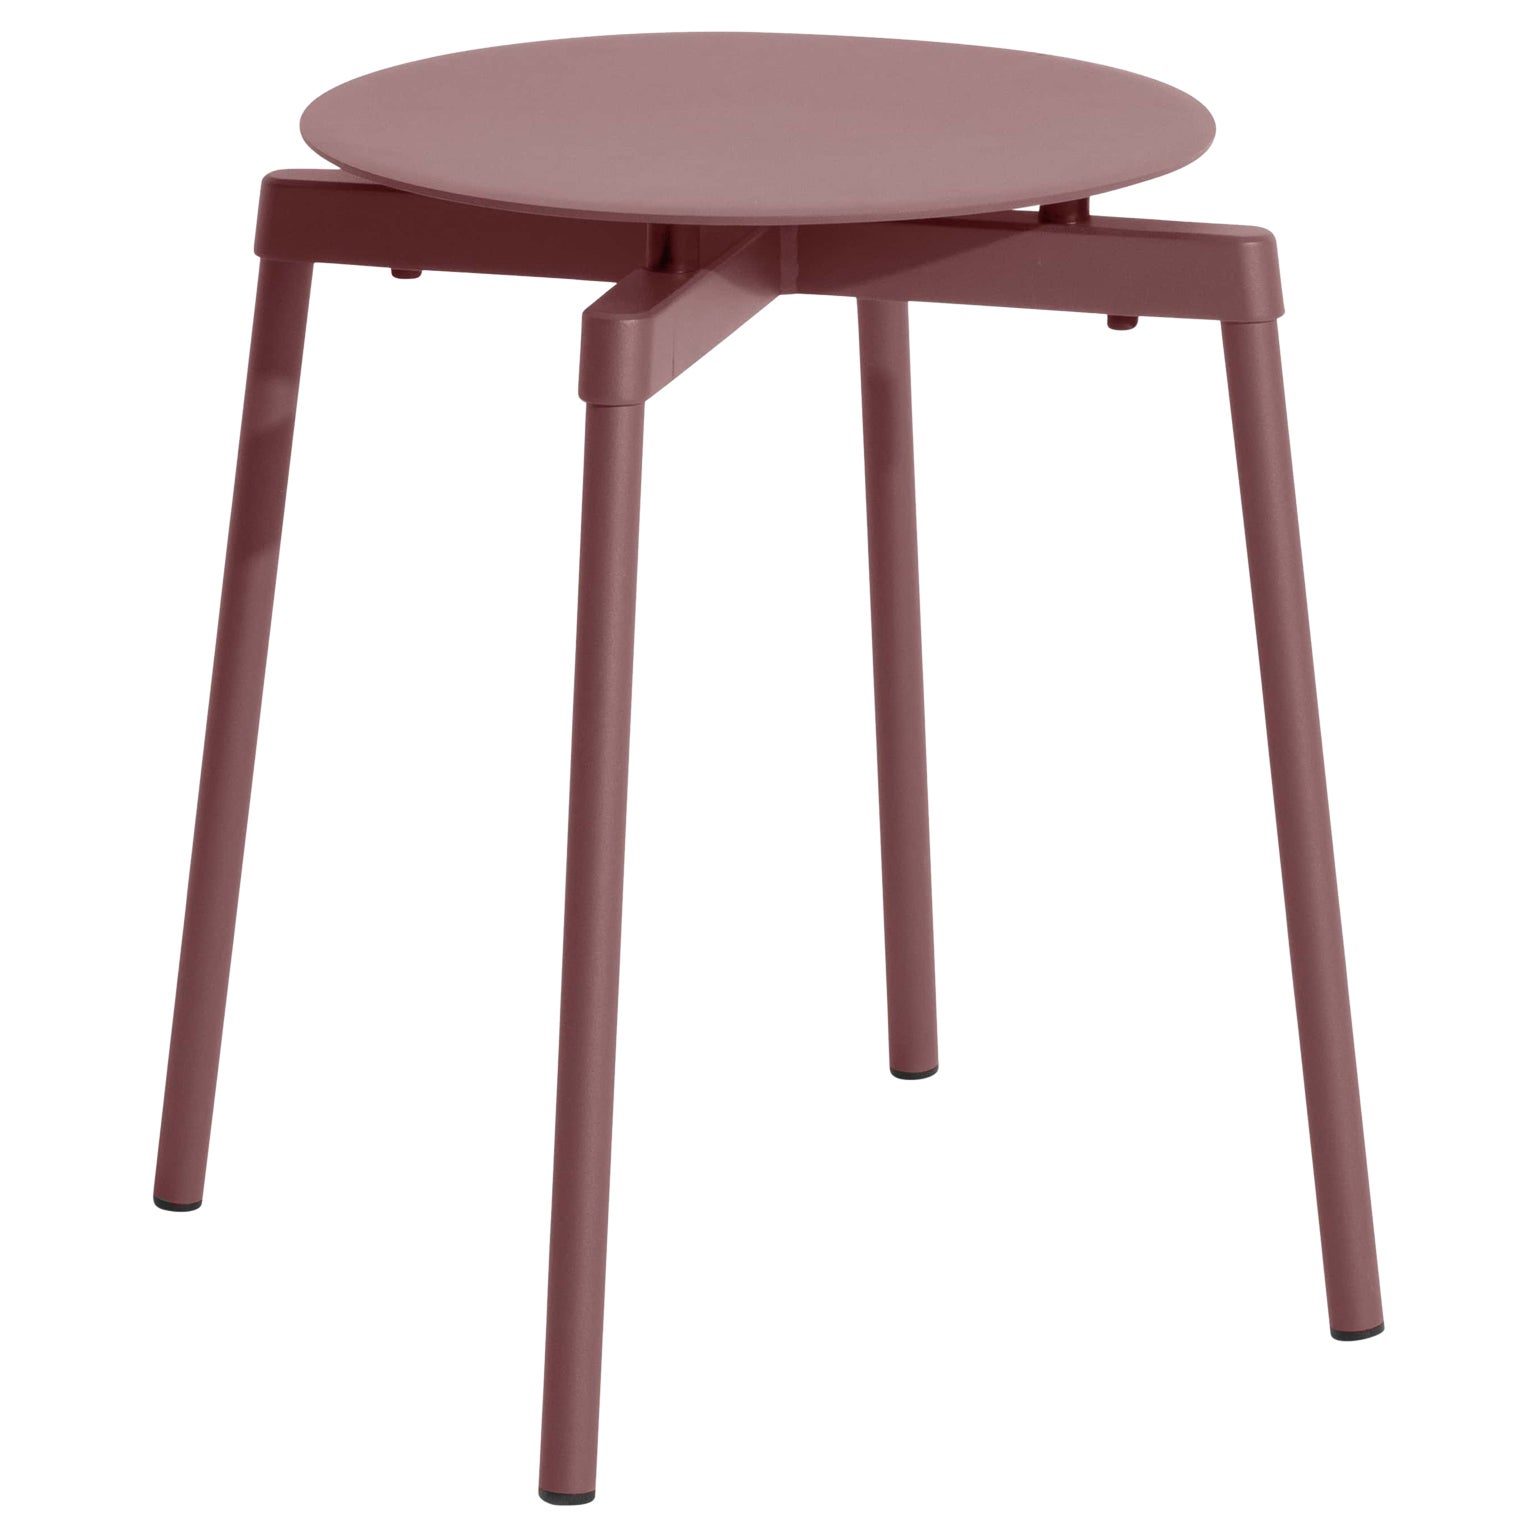 Petite Friture Fromme Stool in Brown-Red Aluminium by Tom Chung, 2020 For Sale